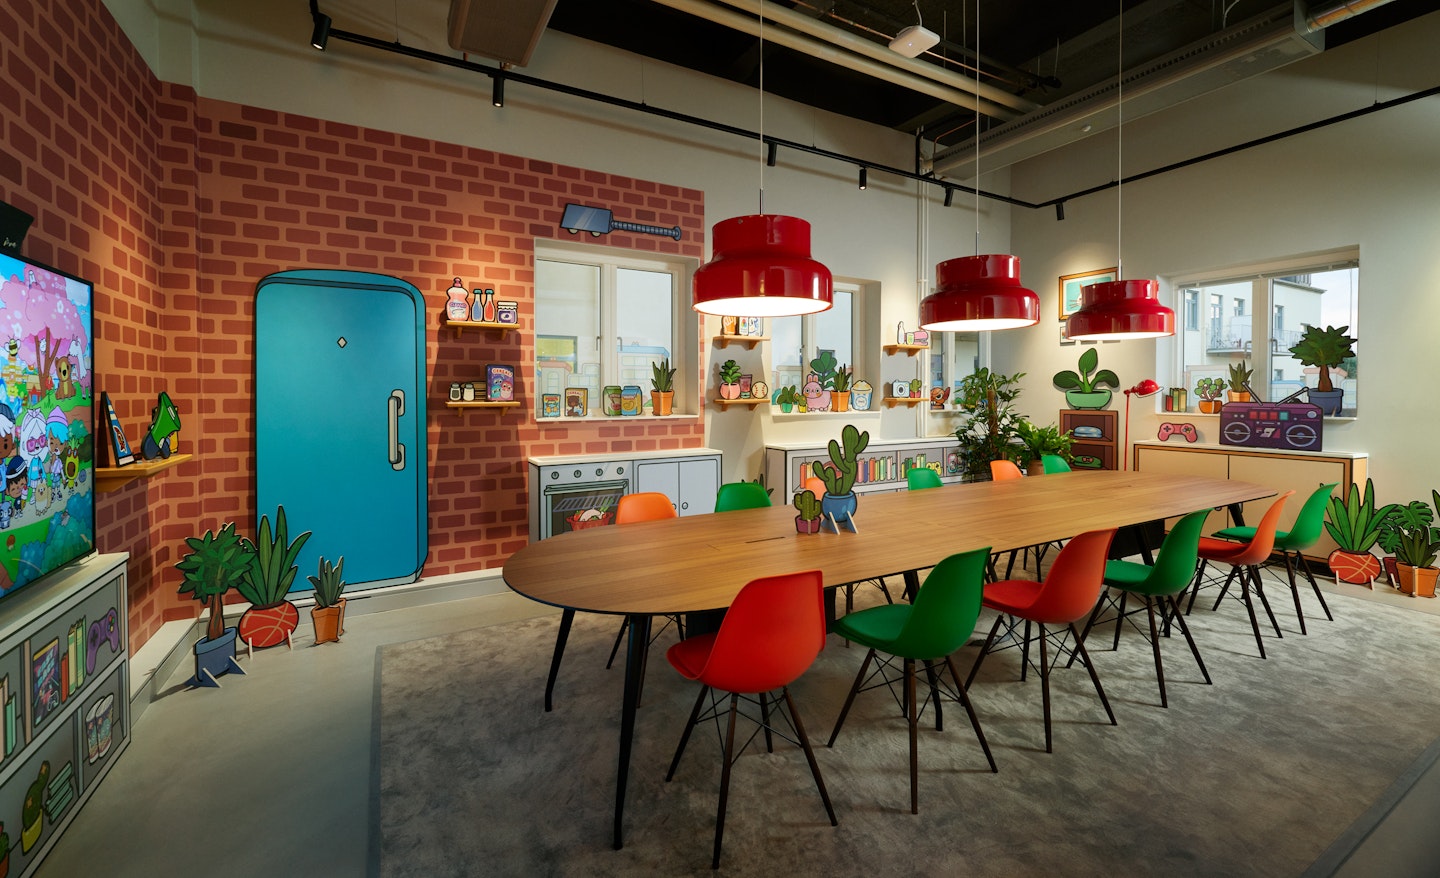 This is a photo of a meeting room from Toca Boca Campus. The room's art is designed to look like an apartment from Toca Boca World and there is large cardboard game assets on the wall